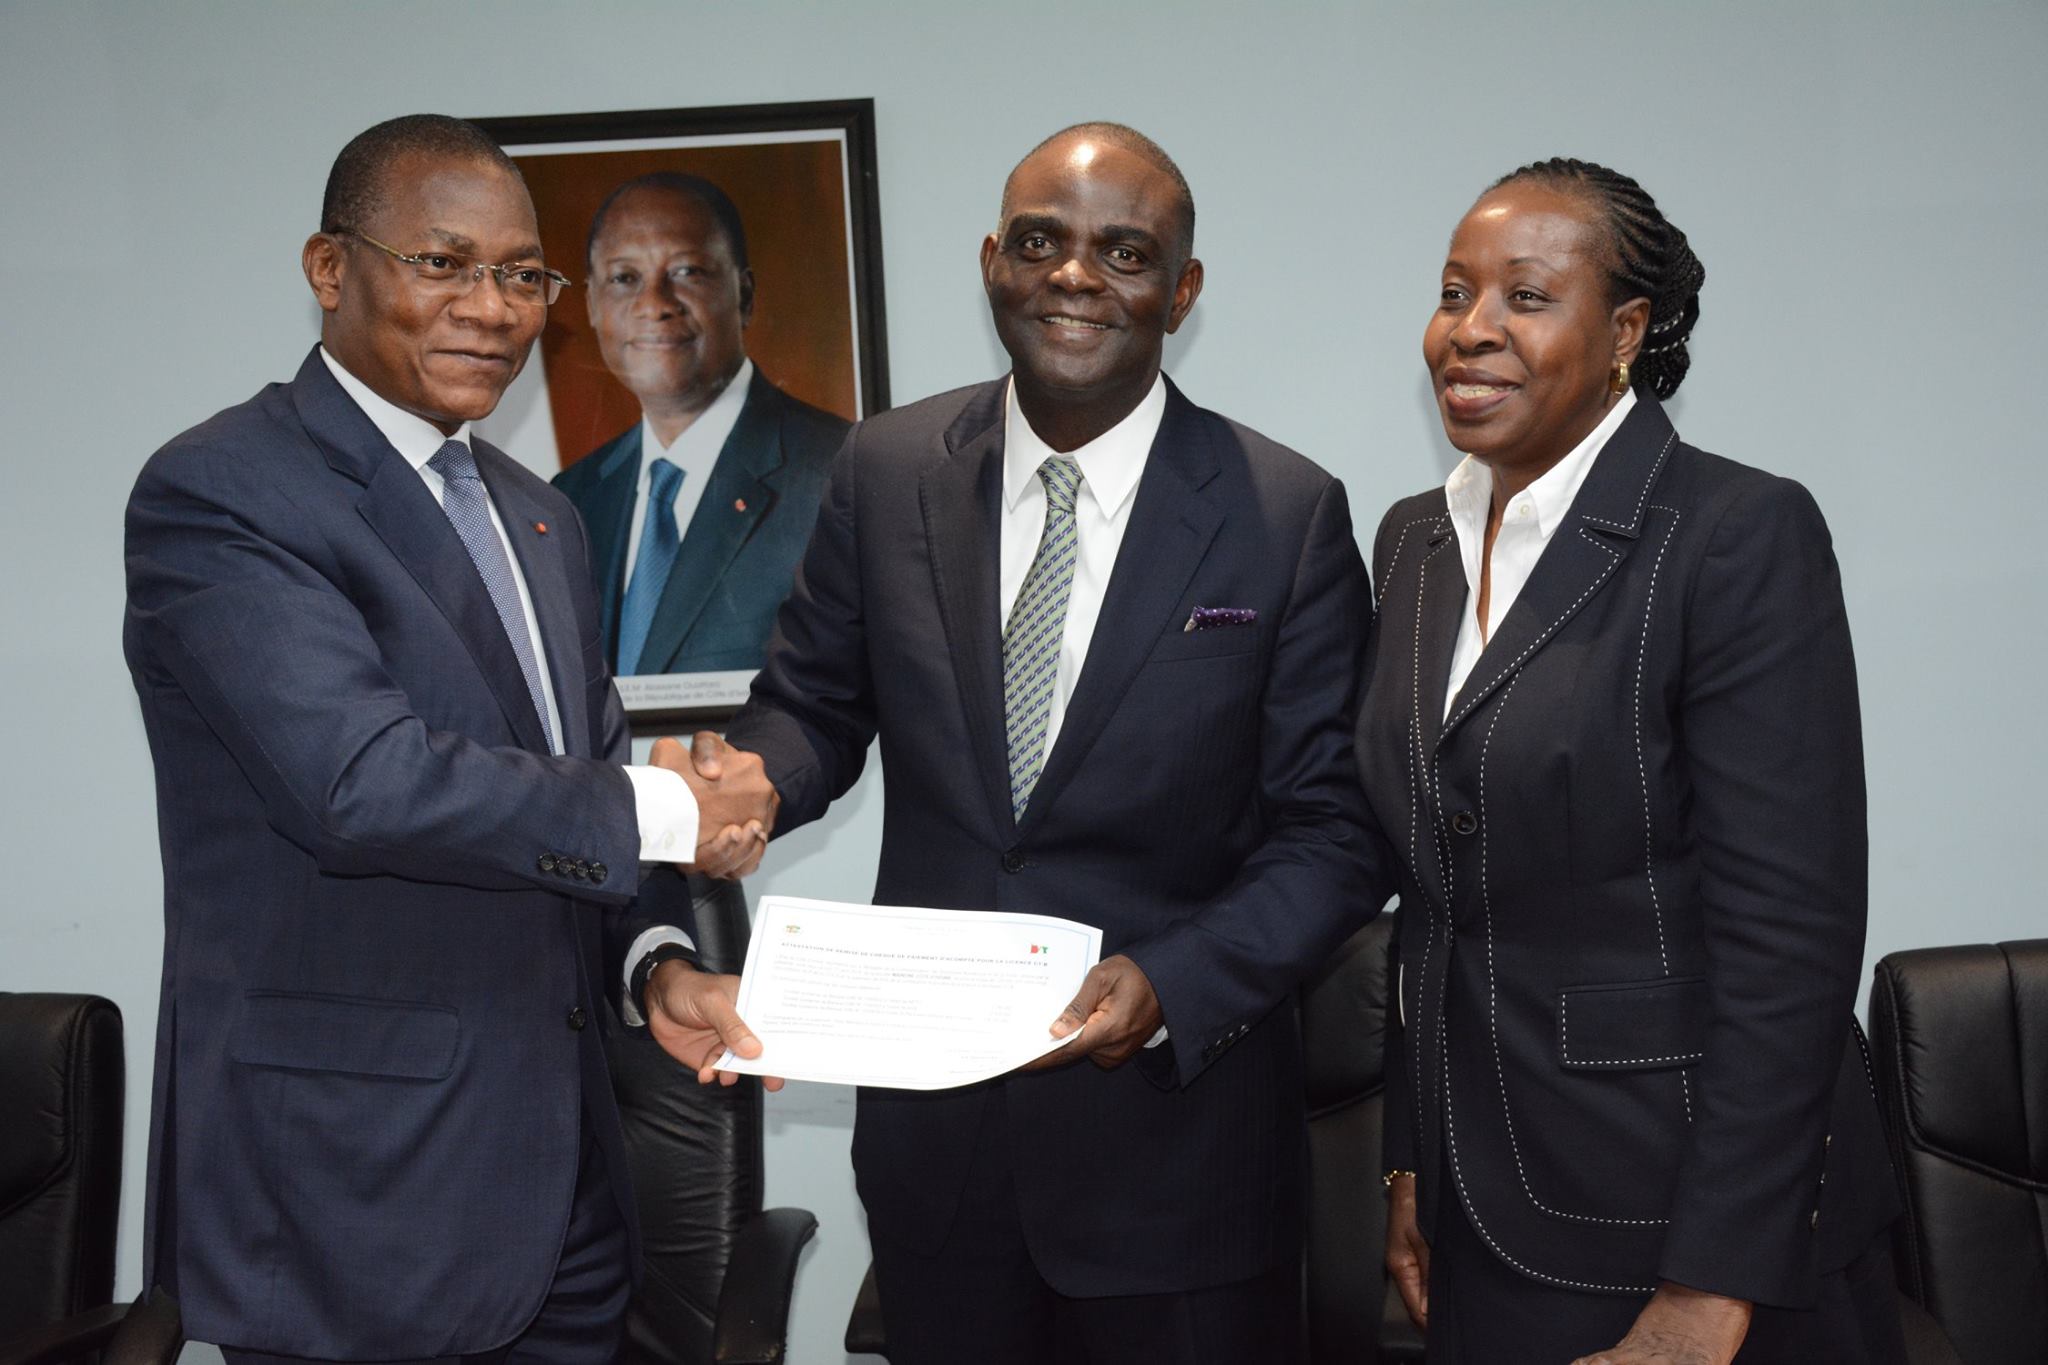 MainOne to expand connectivity services in Cote d’Ivoire